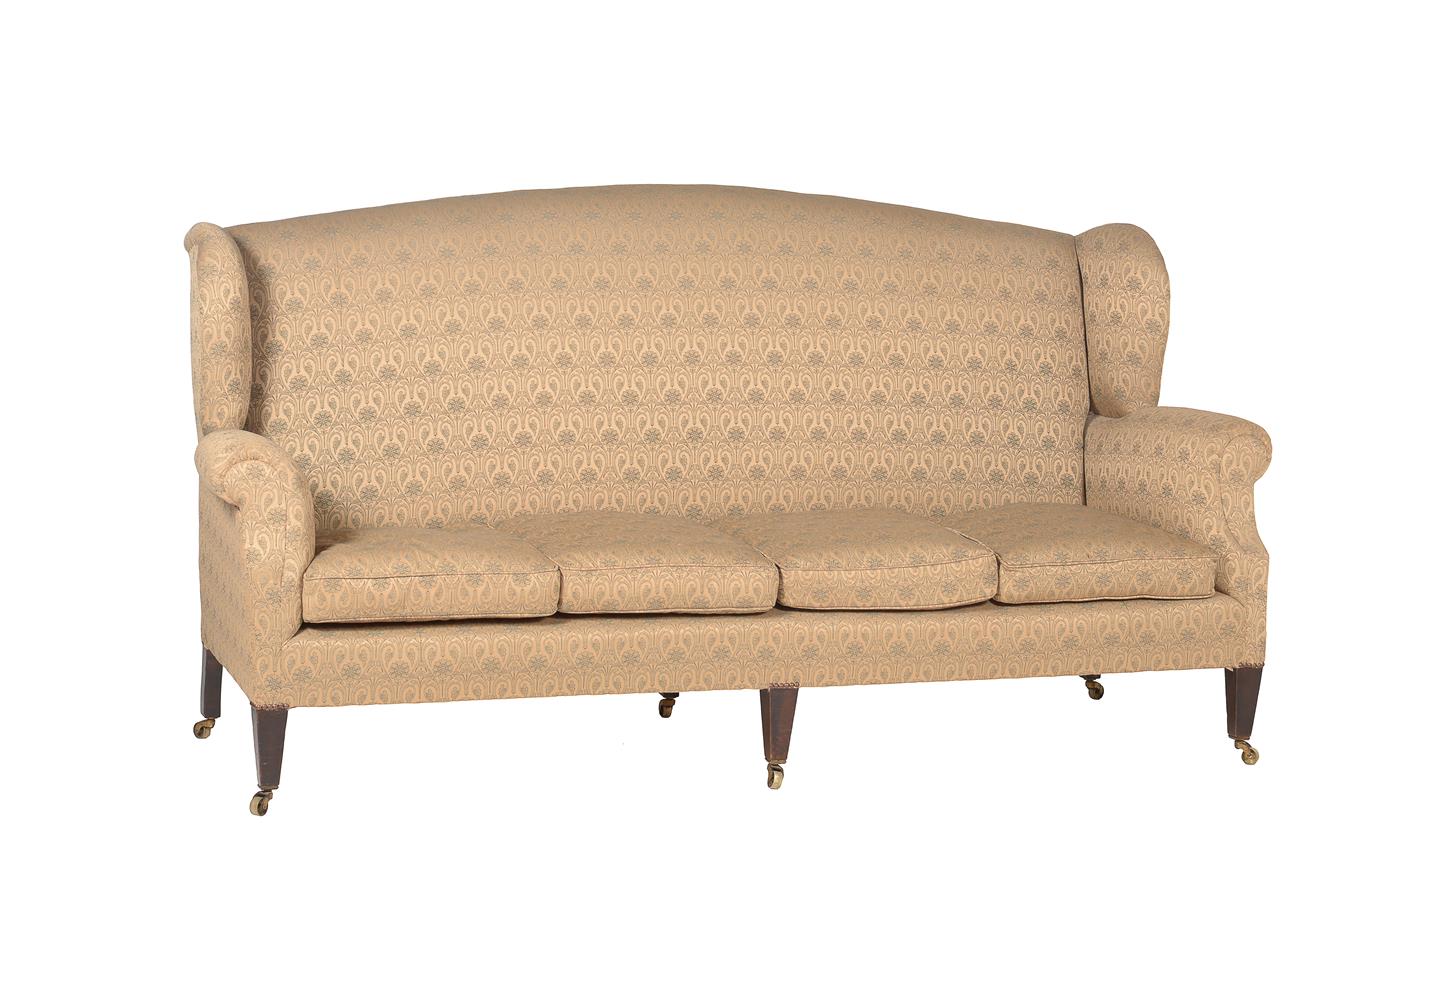 A MAHOGANY AND UPHOLSTERED SOFA IN GEORGE III STYLE